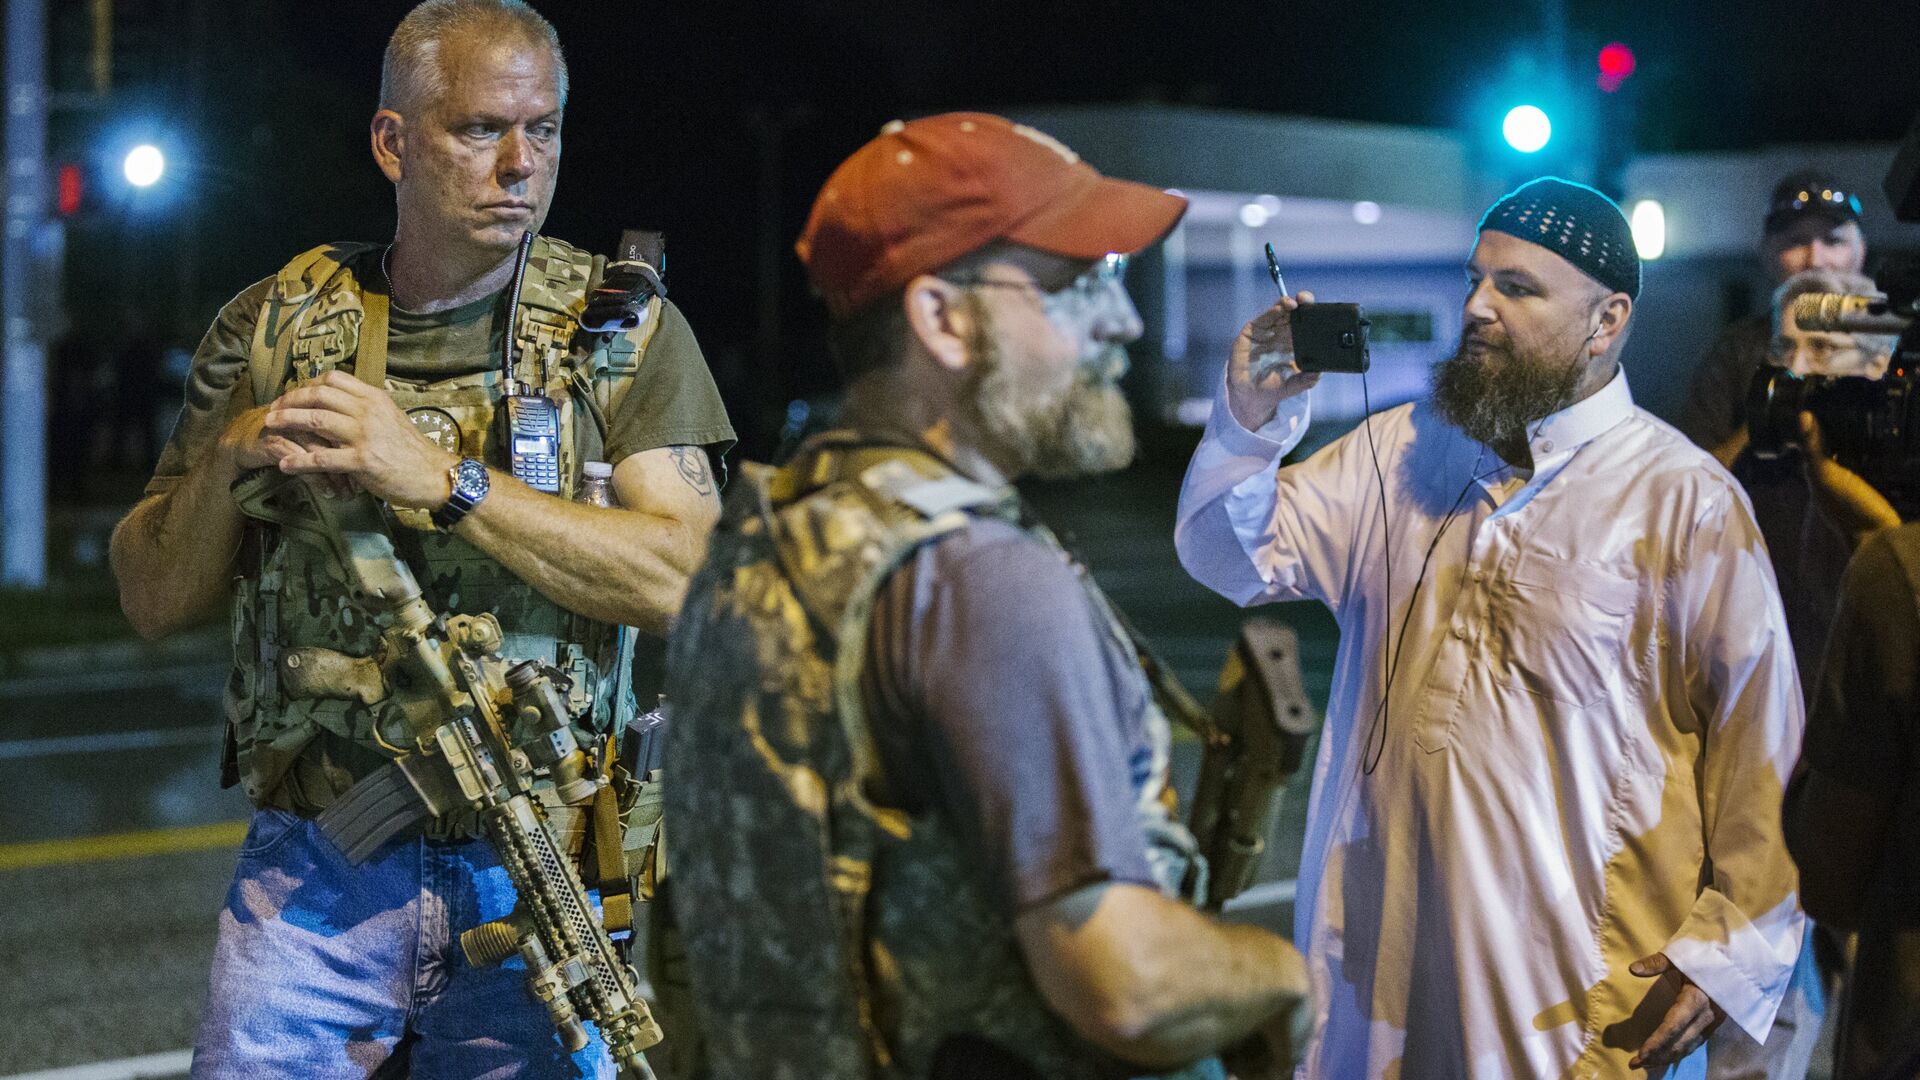 Members of the Oath Keepers walk with their personal weapons on the street during protests in Ferguson, Missouri August 11, 2015. - Sputnik International, 1920, 23.01.2022